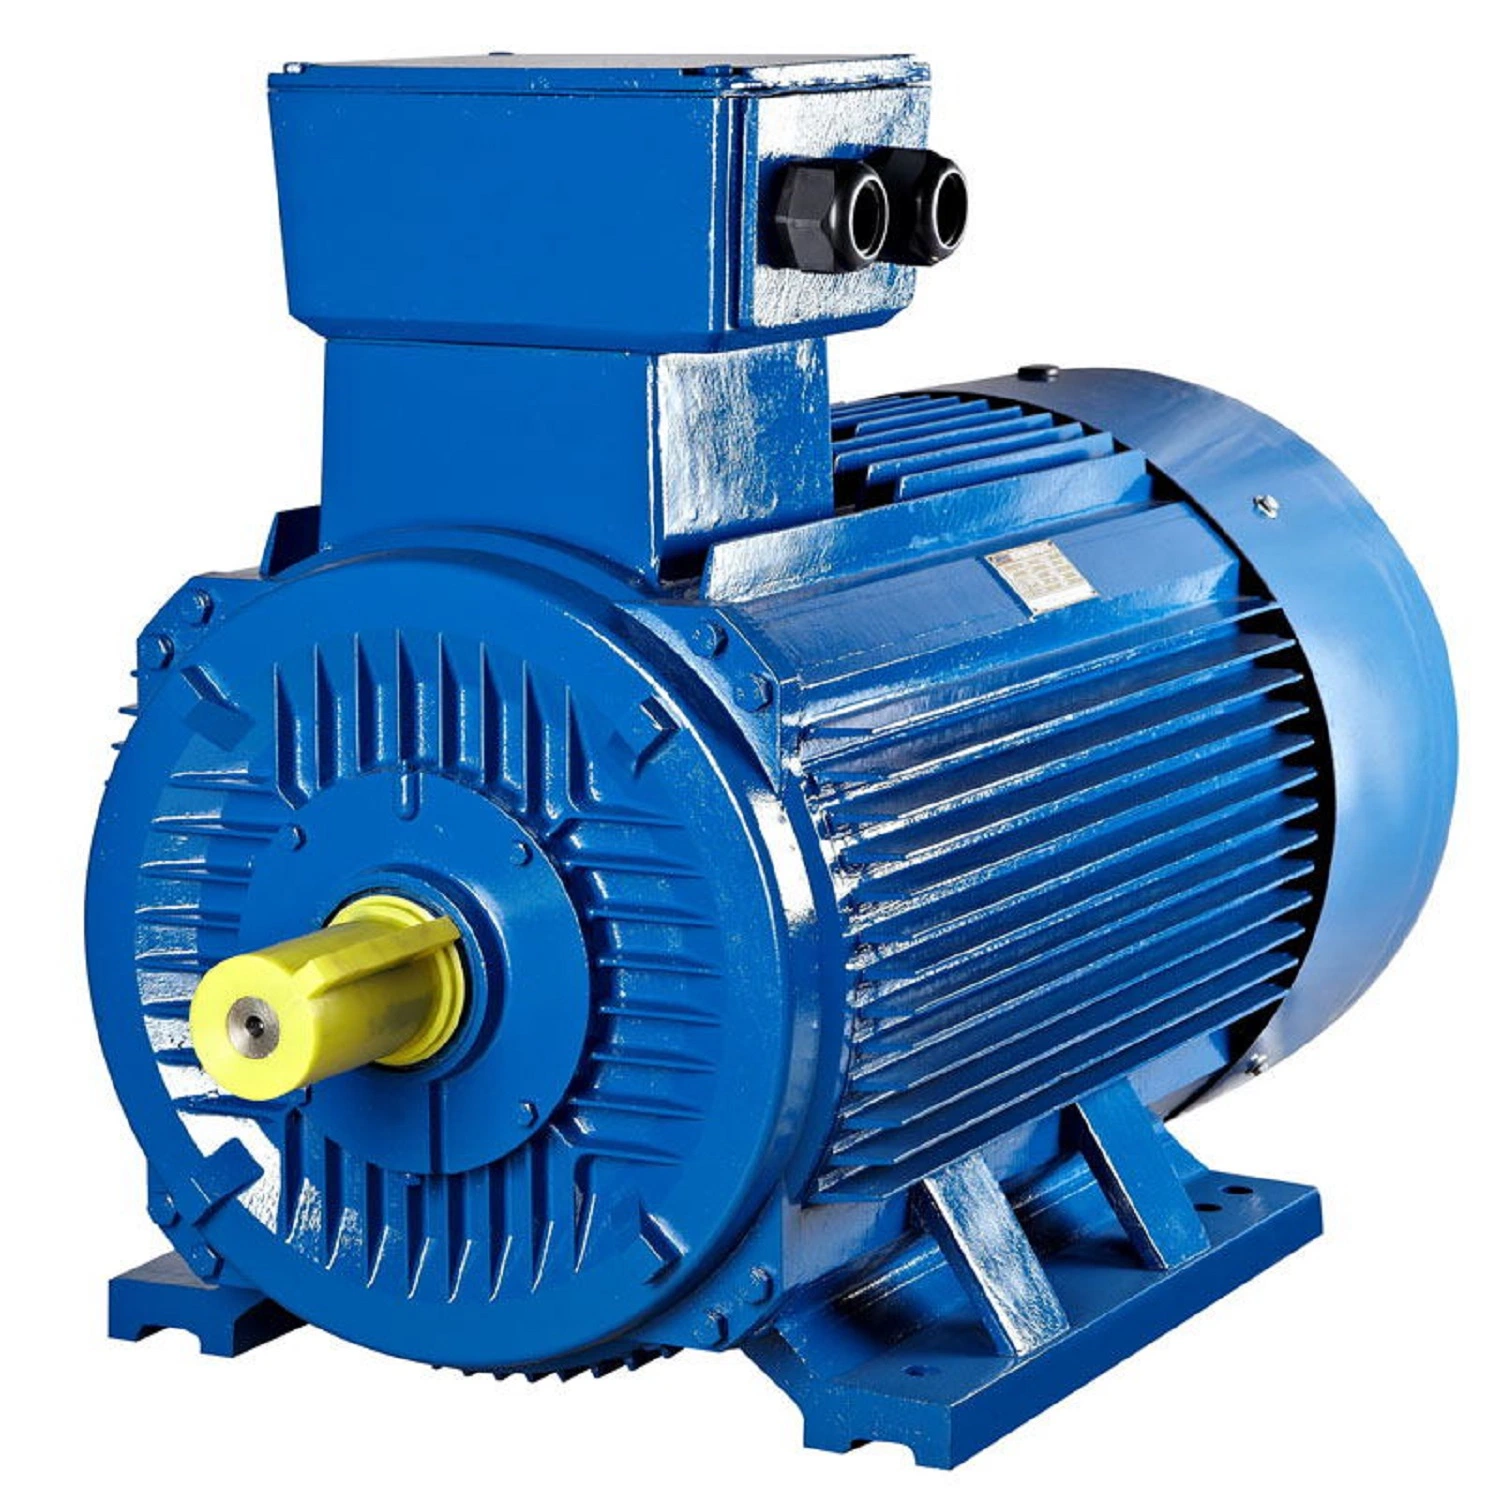 Chinese Ie1 Ie2 Ie3 Premium High Efficiency AC Electric/Electrical Induction Asynchronous Electric Motor with 50Hz 60Hz 380V 230/400V 415V 440V 460V (1HP-420HP)